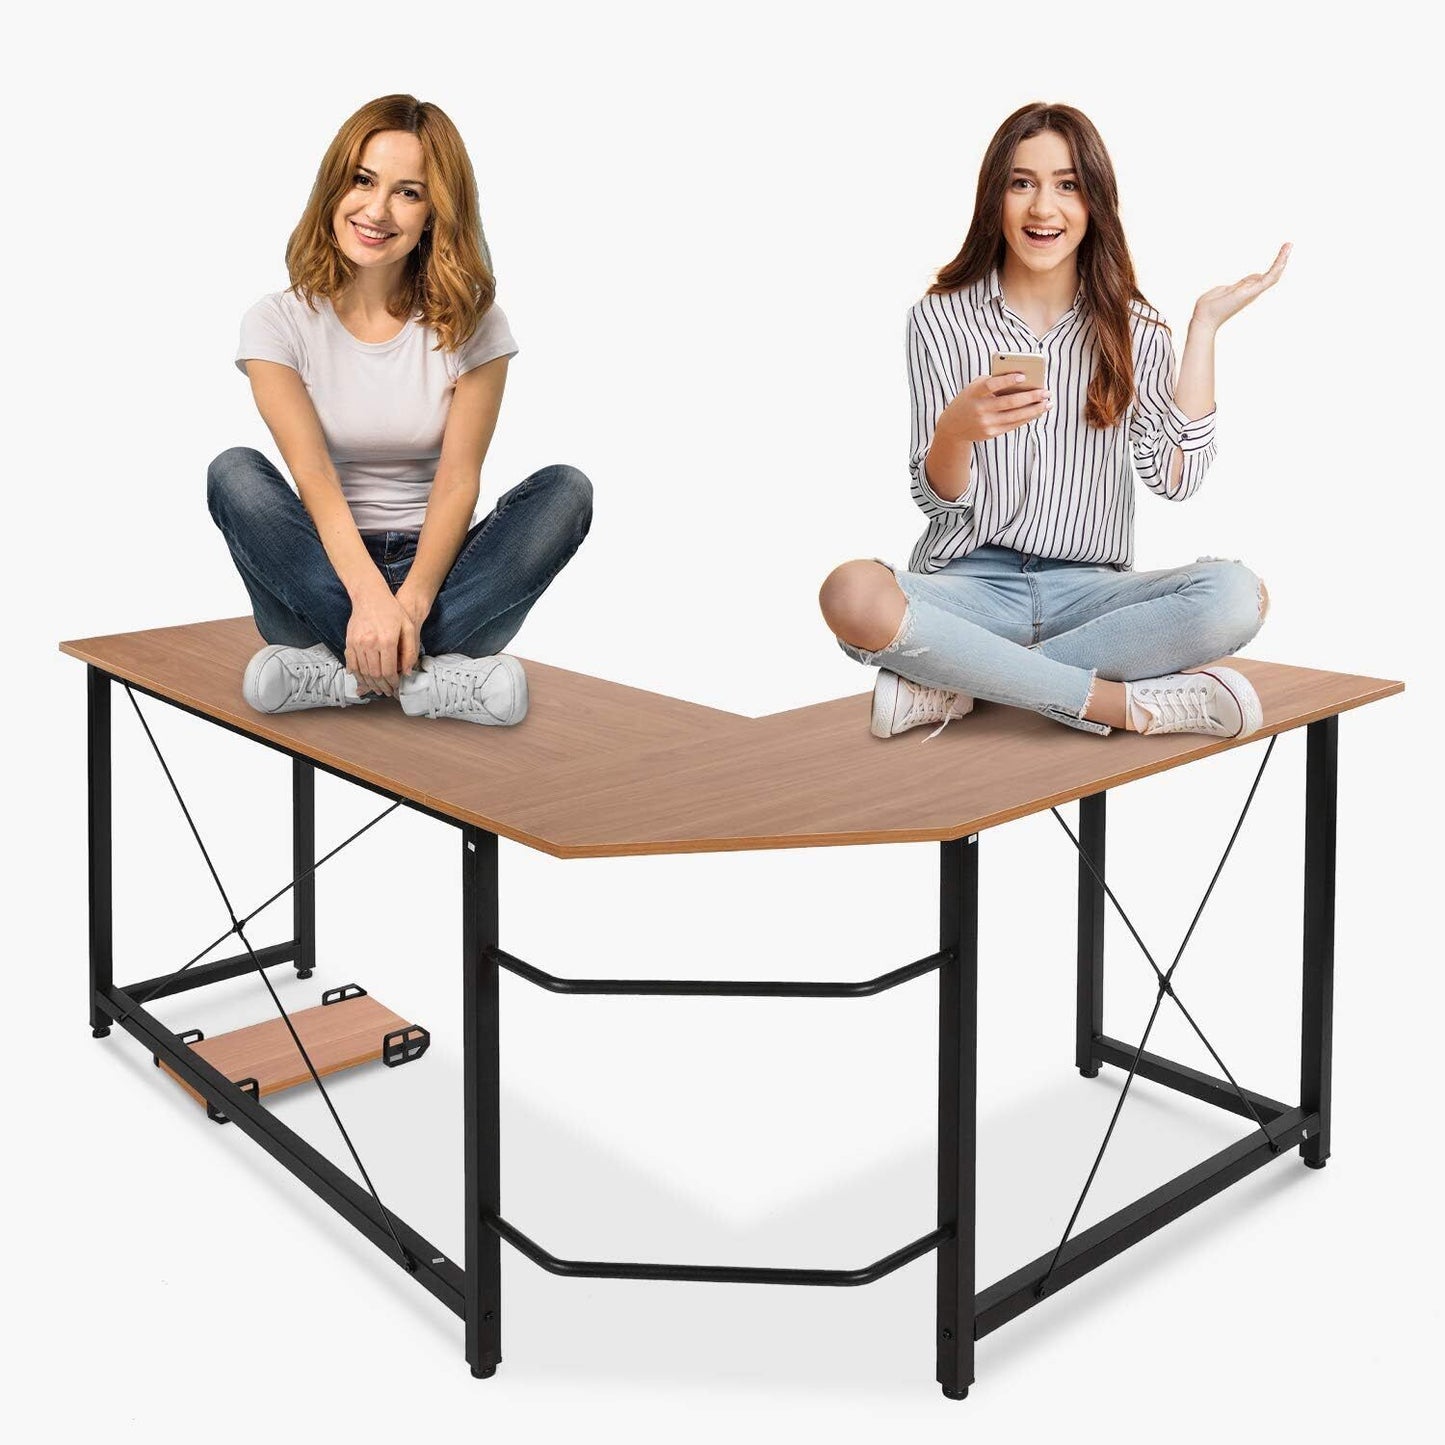 Arlopu 66.5'' L-Shaped Corner Computer Desk PC Laptop Table Writing Table Workstation for Home Office